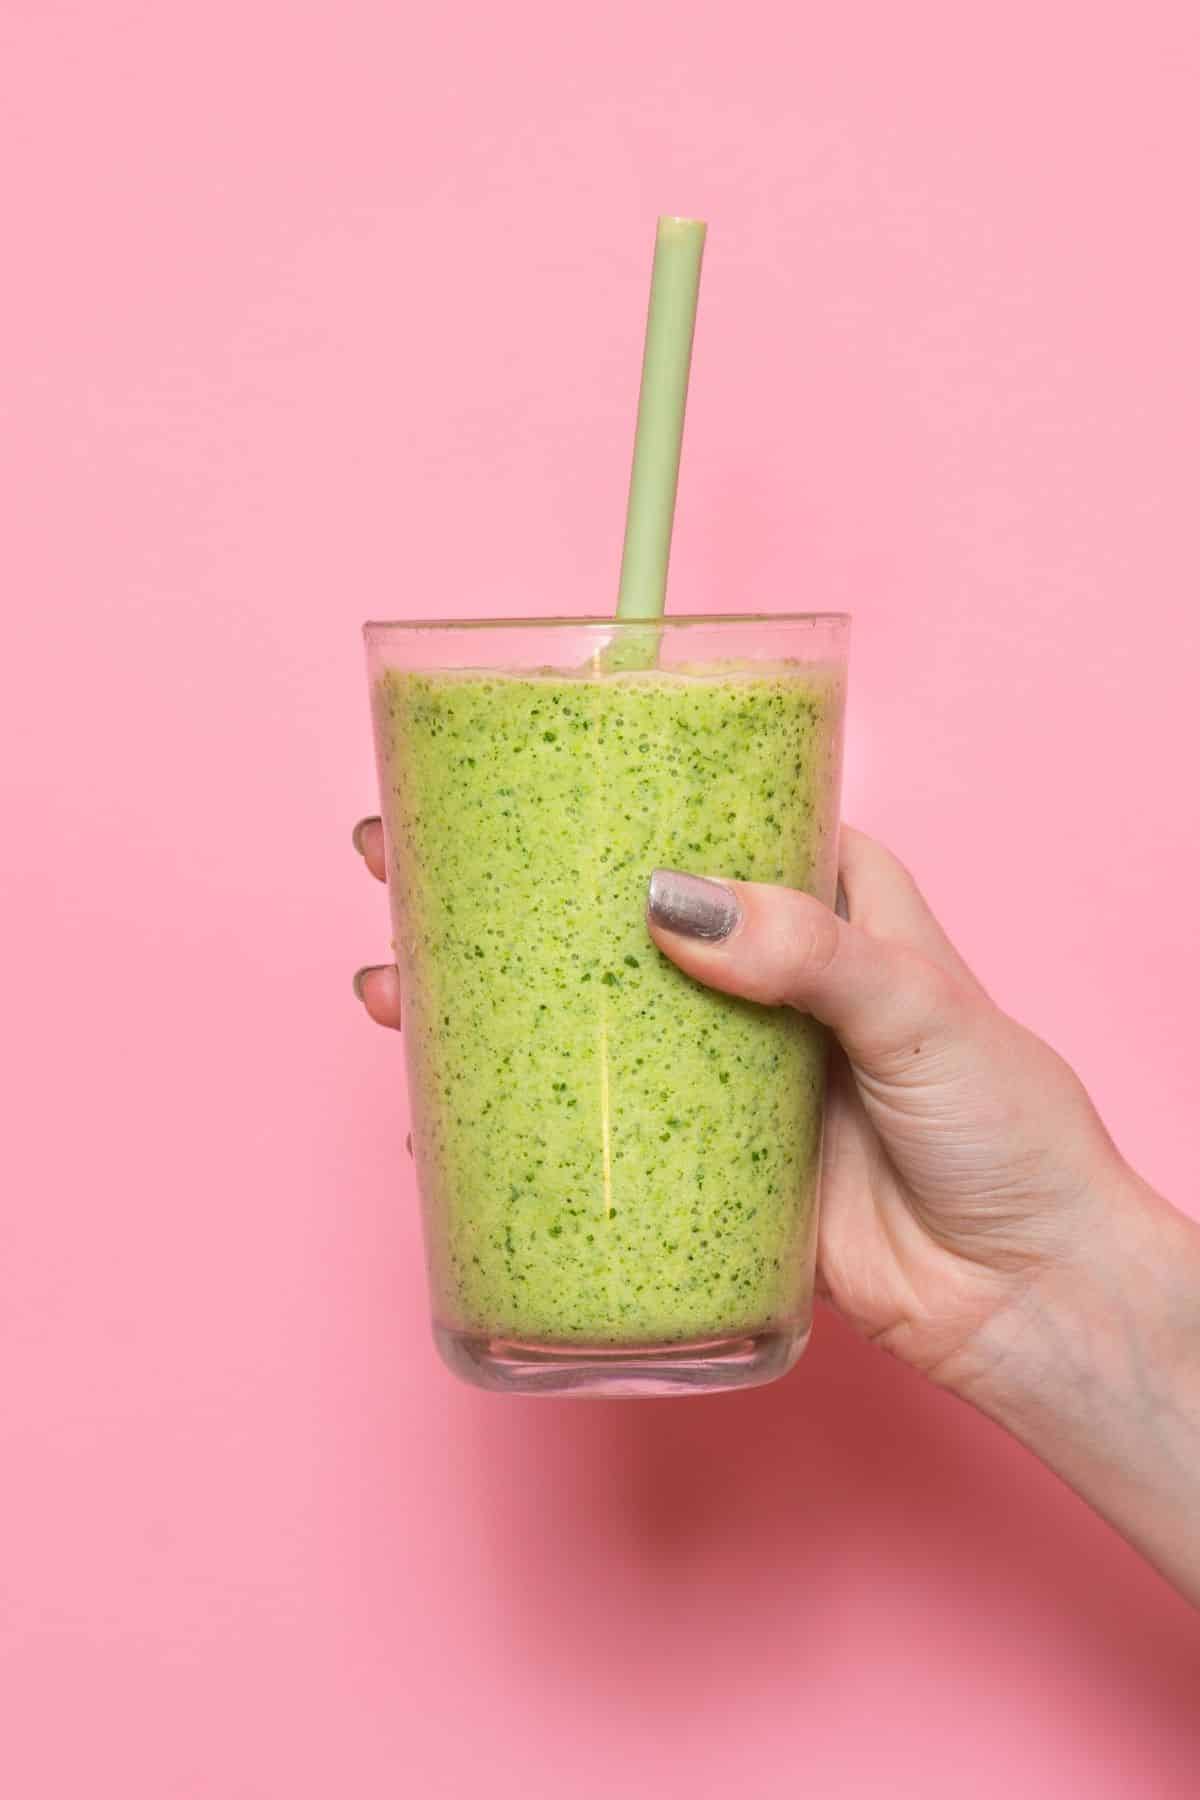 https://www.cleaneatingkitchen.com/wp-content/uploads/2020/10/woman-holding-a-green-smoothie-in-front-of-a-pink-background.jpg